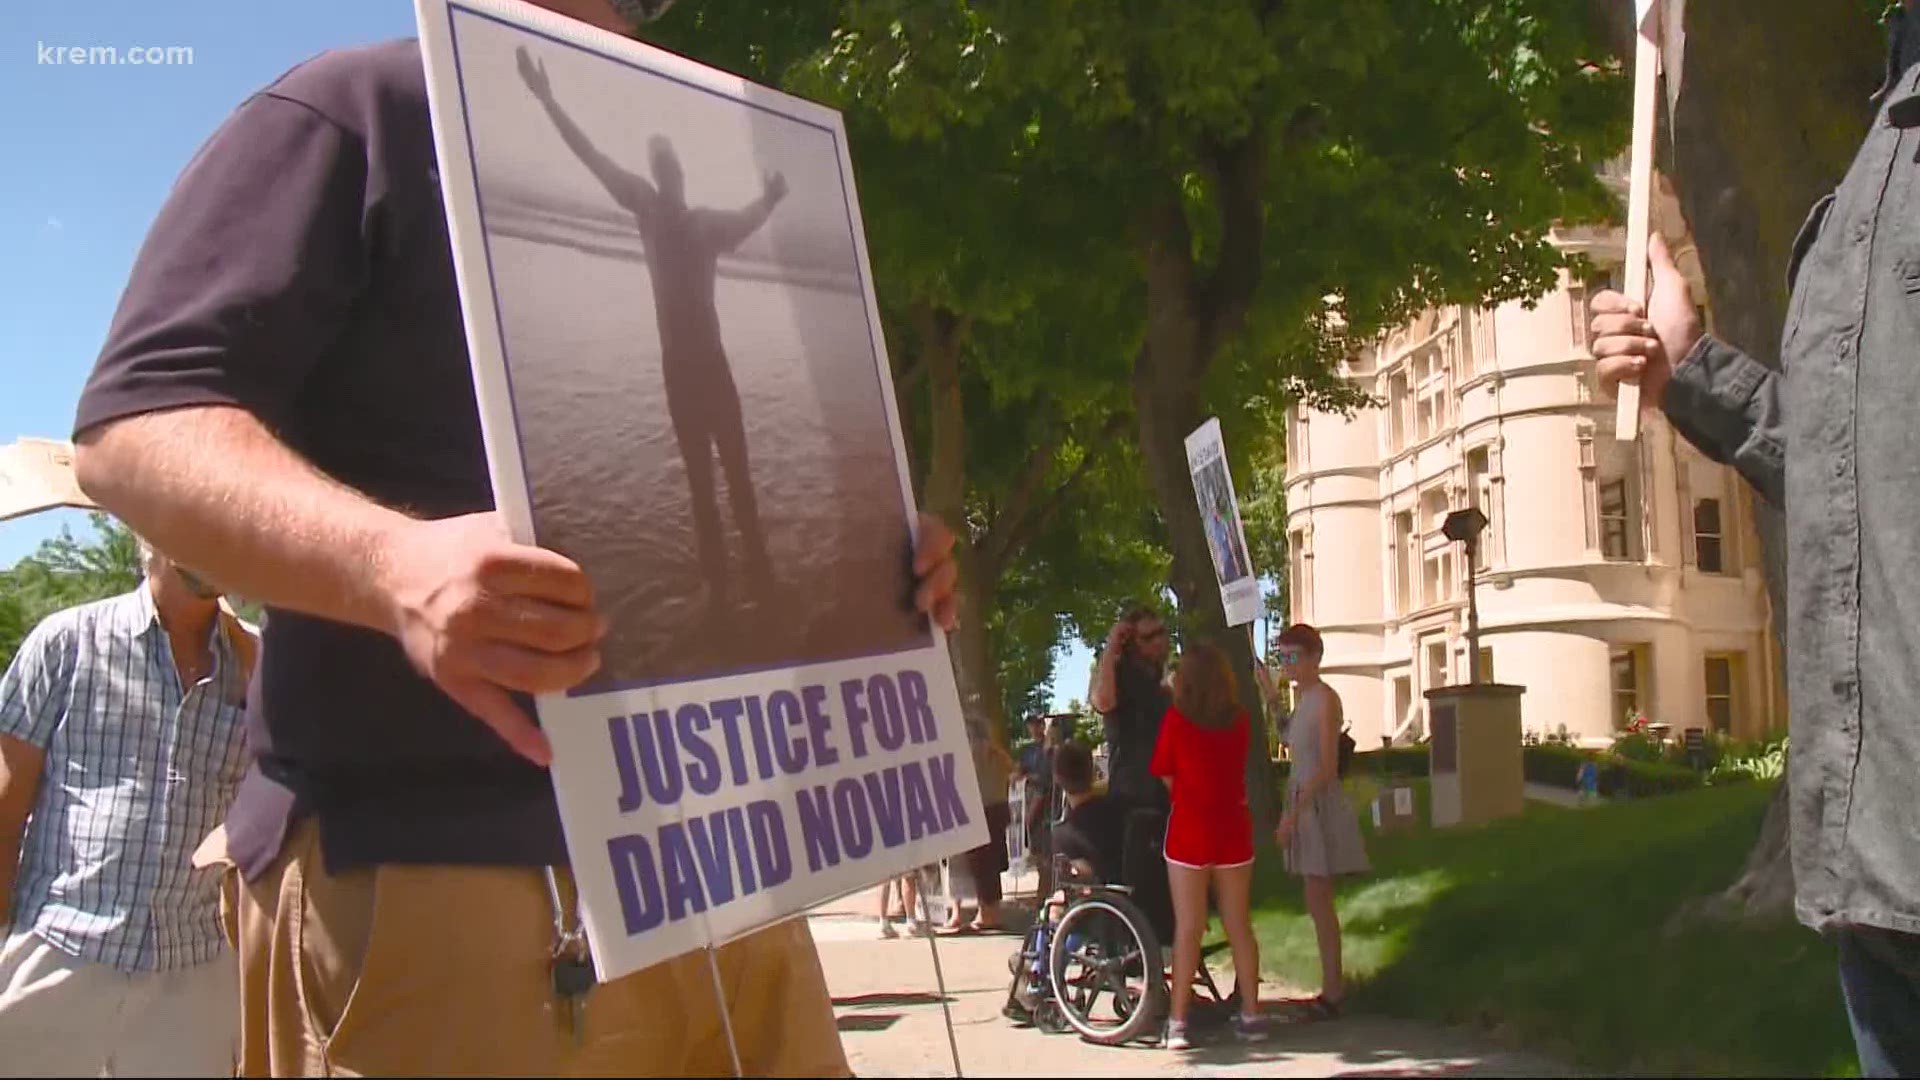 David Novak's family said they will continue to protest outside the courthouse on the seventh of every month to seek justice for him.